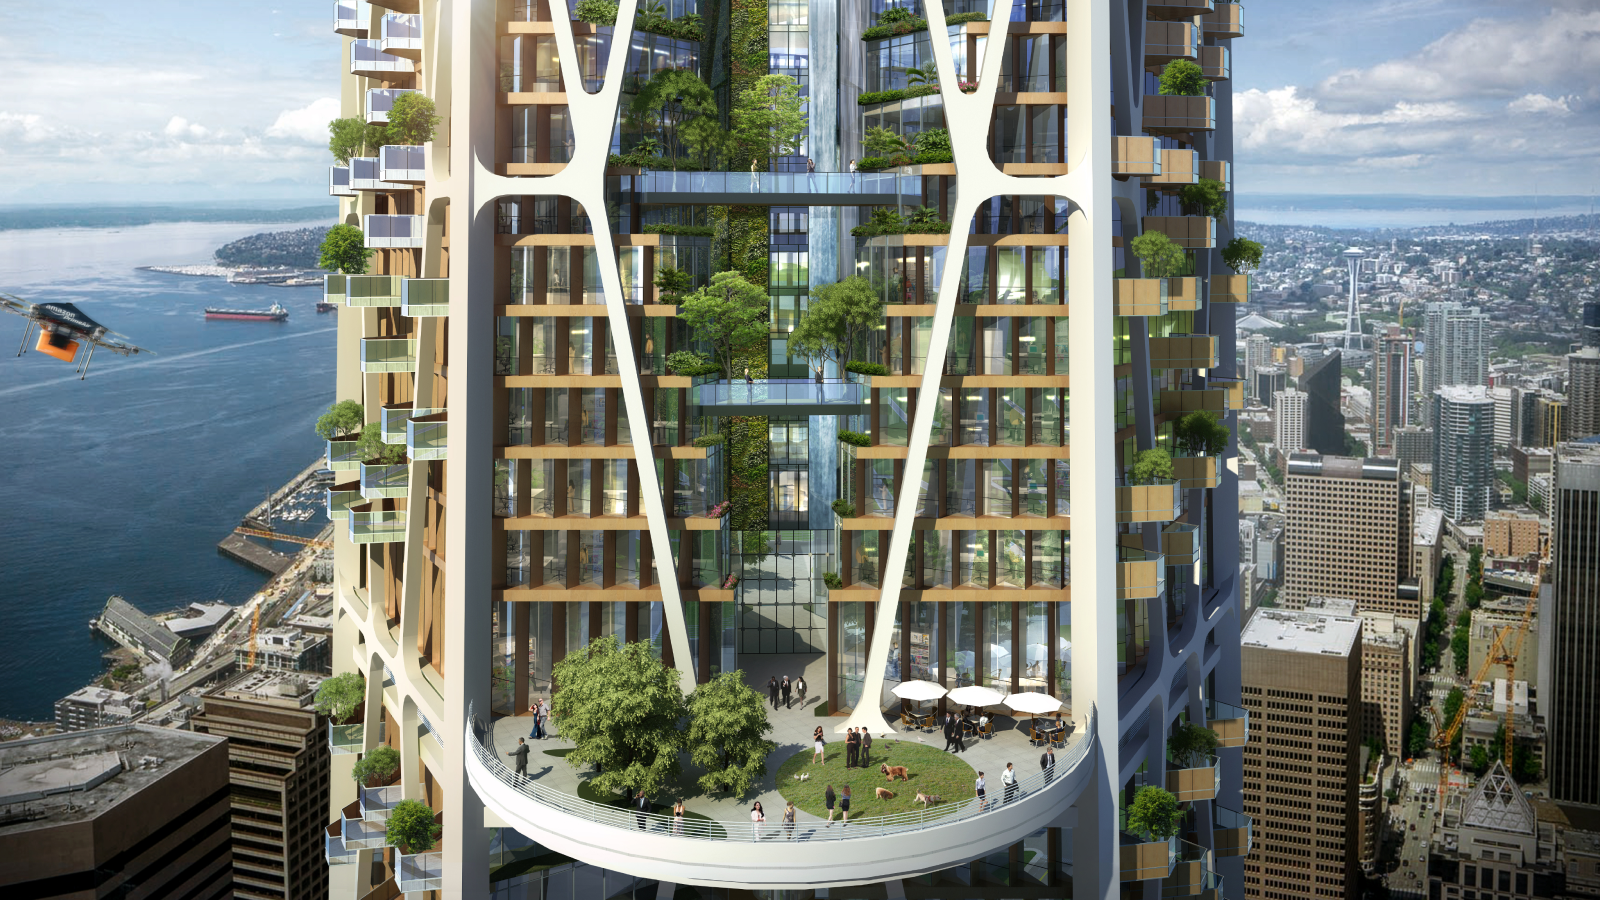 Rendering showing mass timber and vertical gardens